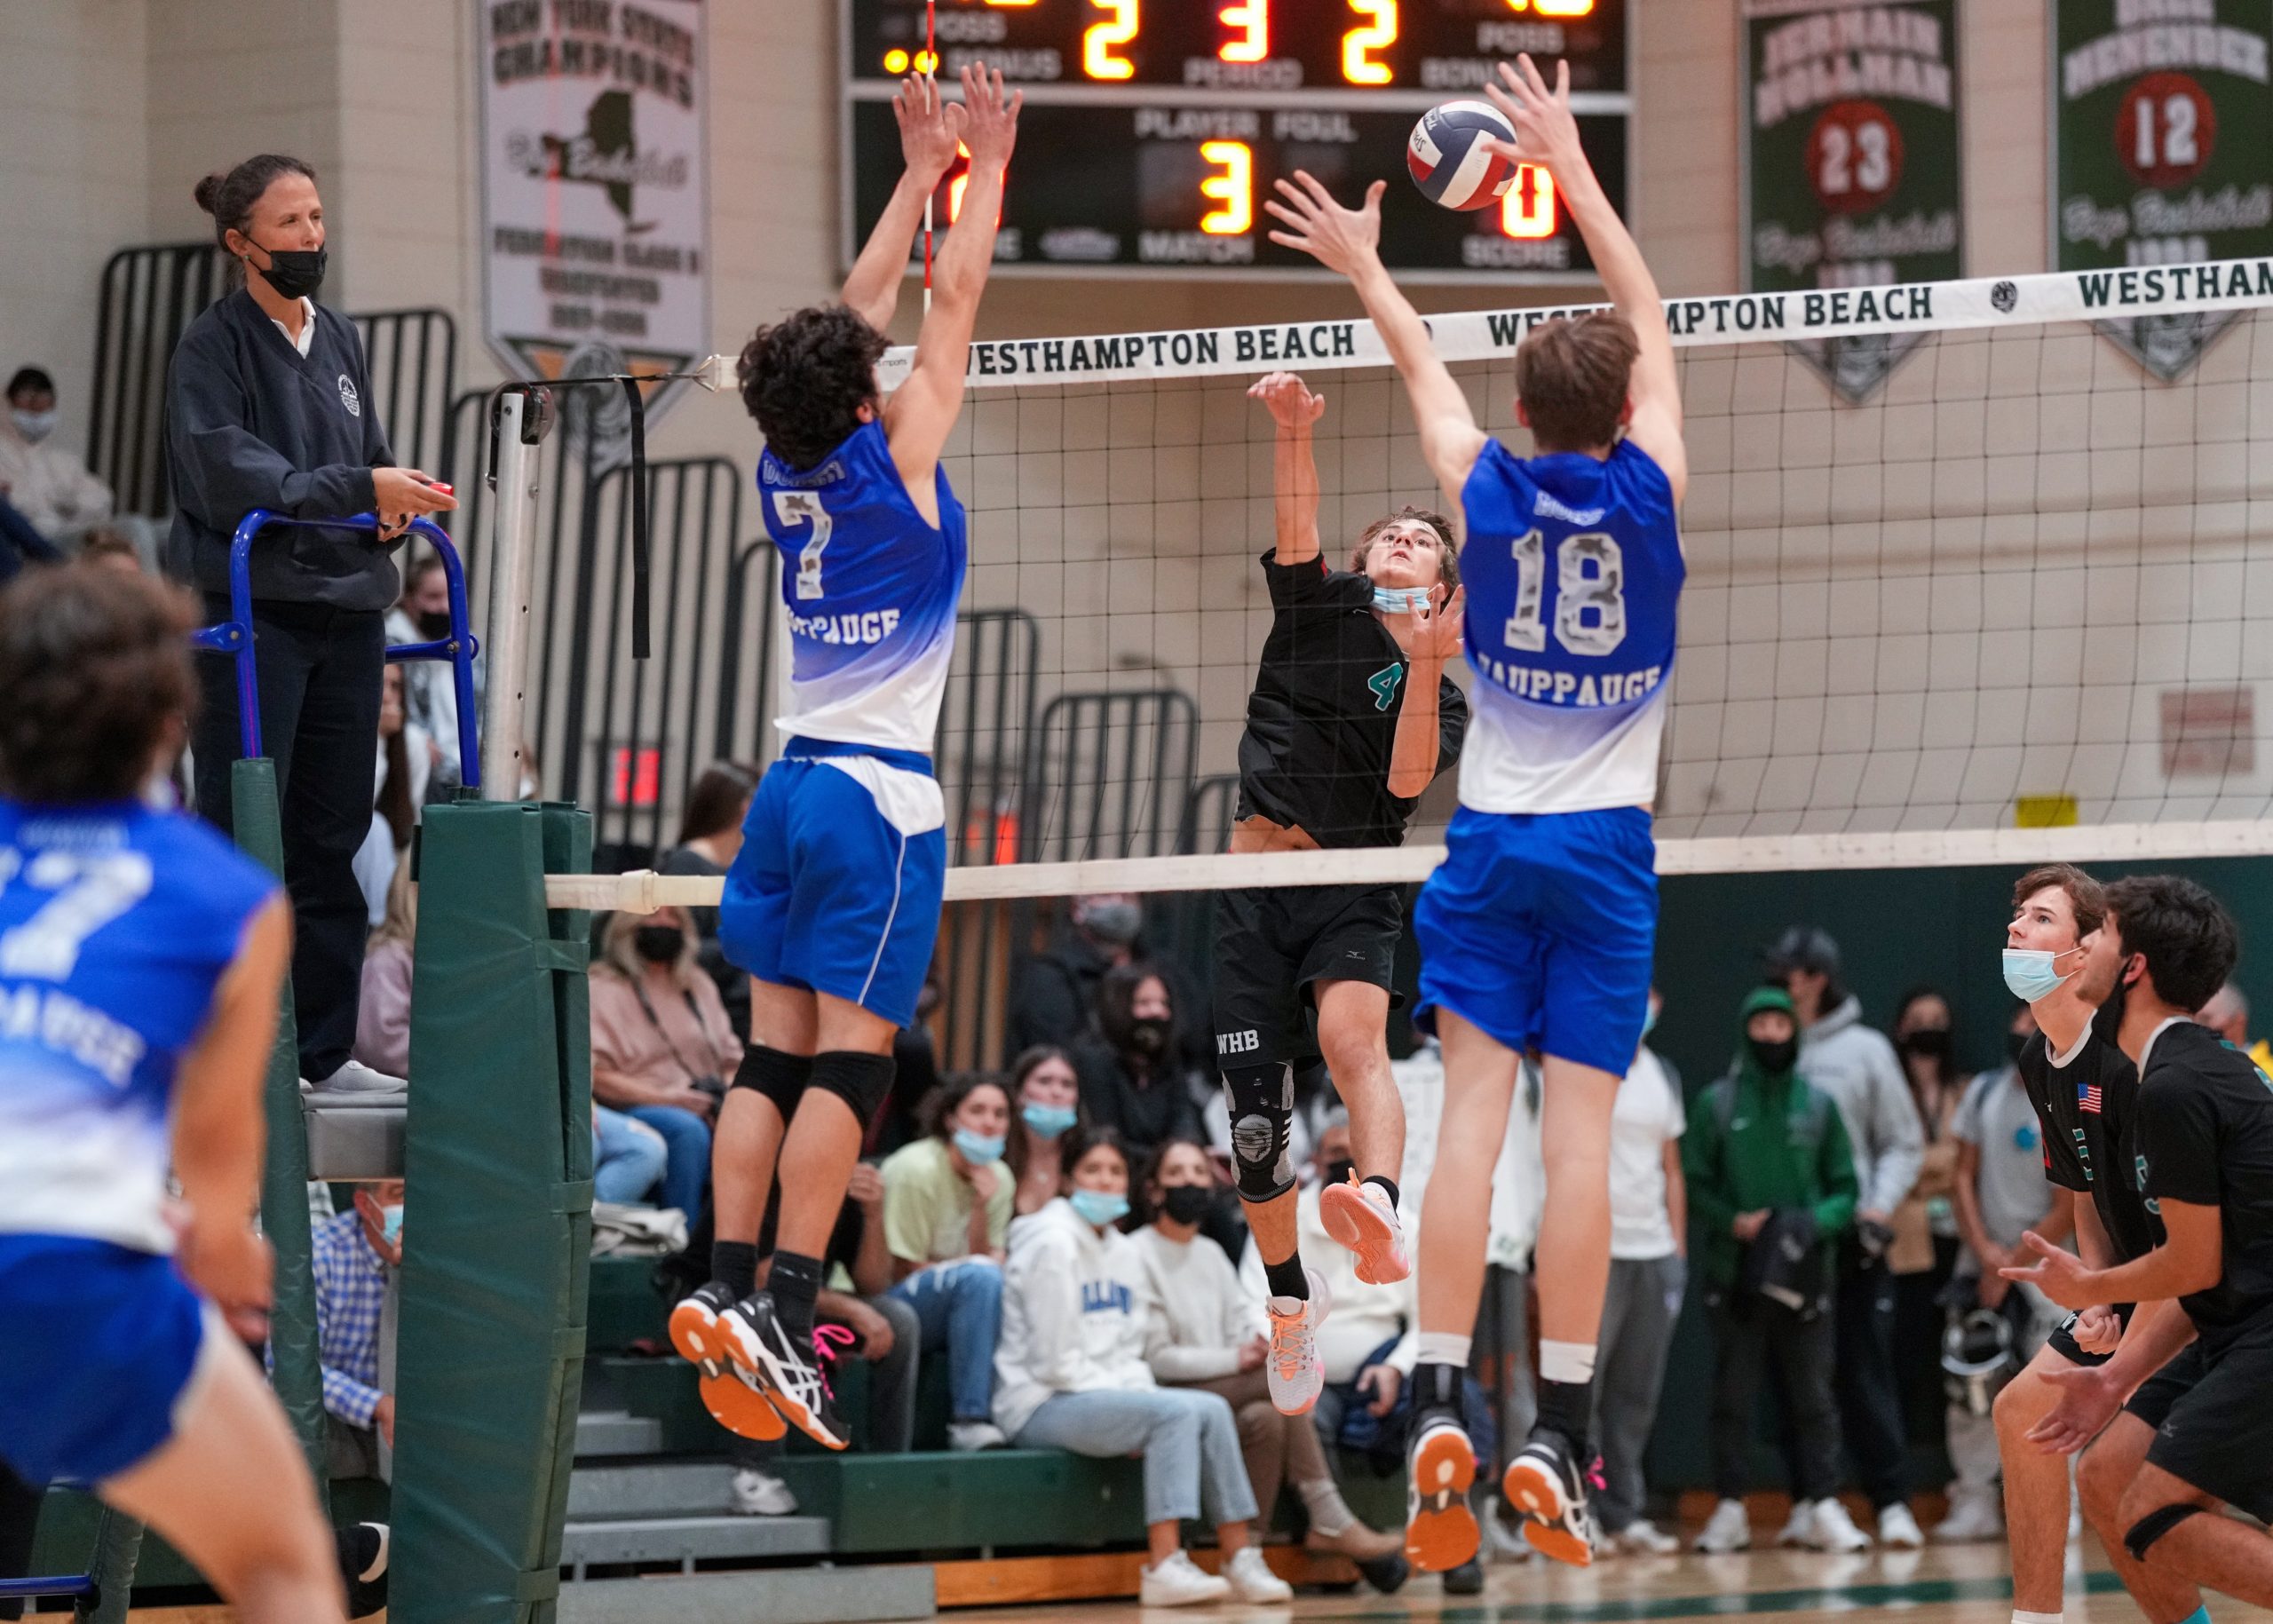 Westhampton Beach sophomore Seth Terry spikes the ball between Hauppauge opponents. RON ESPOSITO